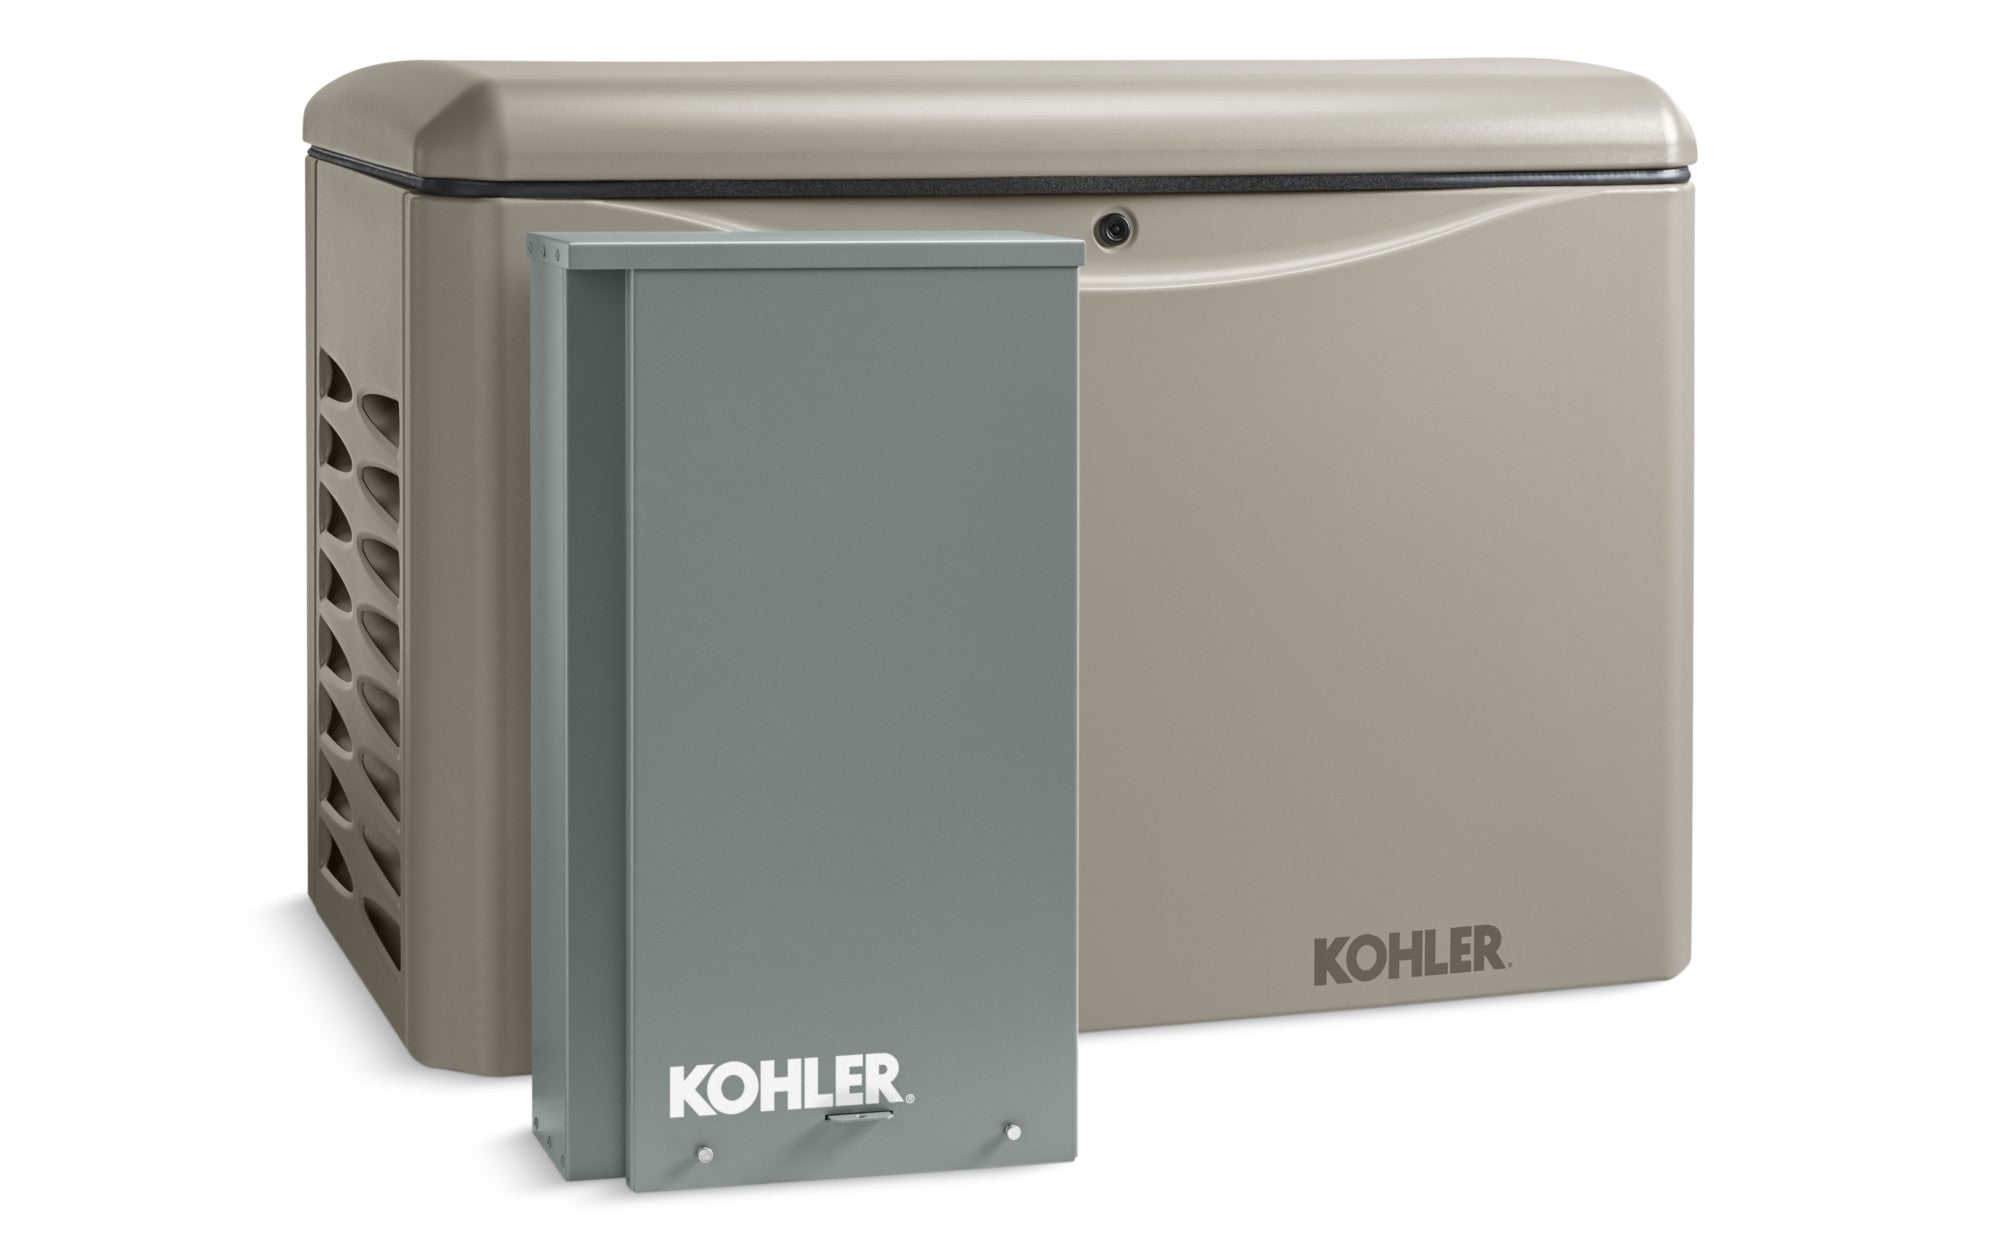 Kohler, Kohler 26RCAL-200SELS Standby Generator 26KW 120/240V Single Phase 200A Automatic Transfer Switch and OnCue Plus New